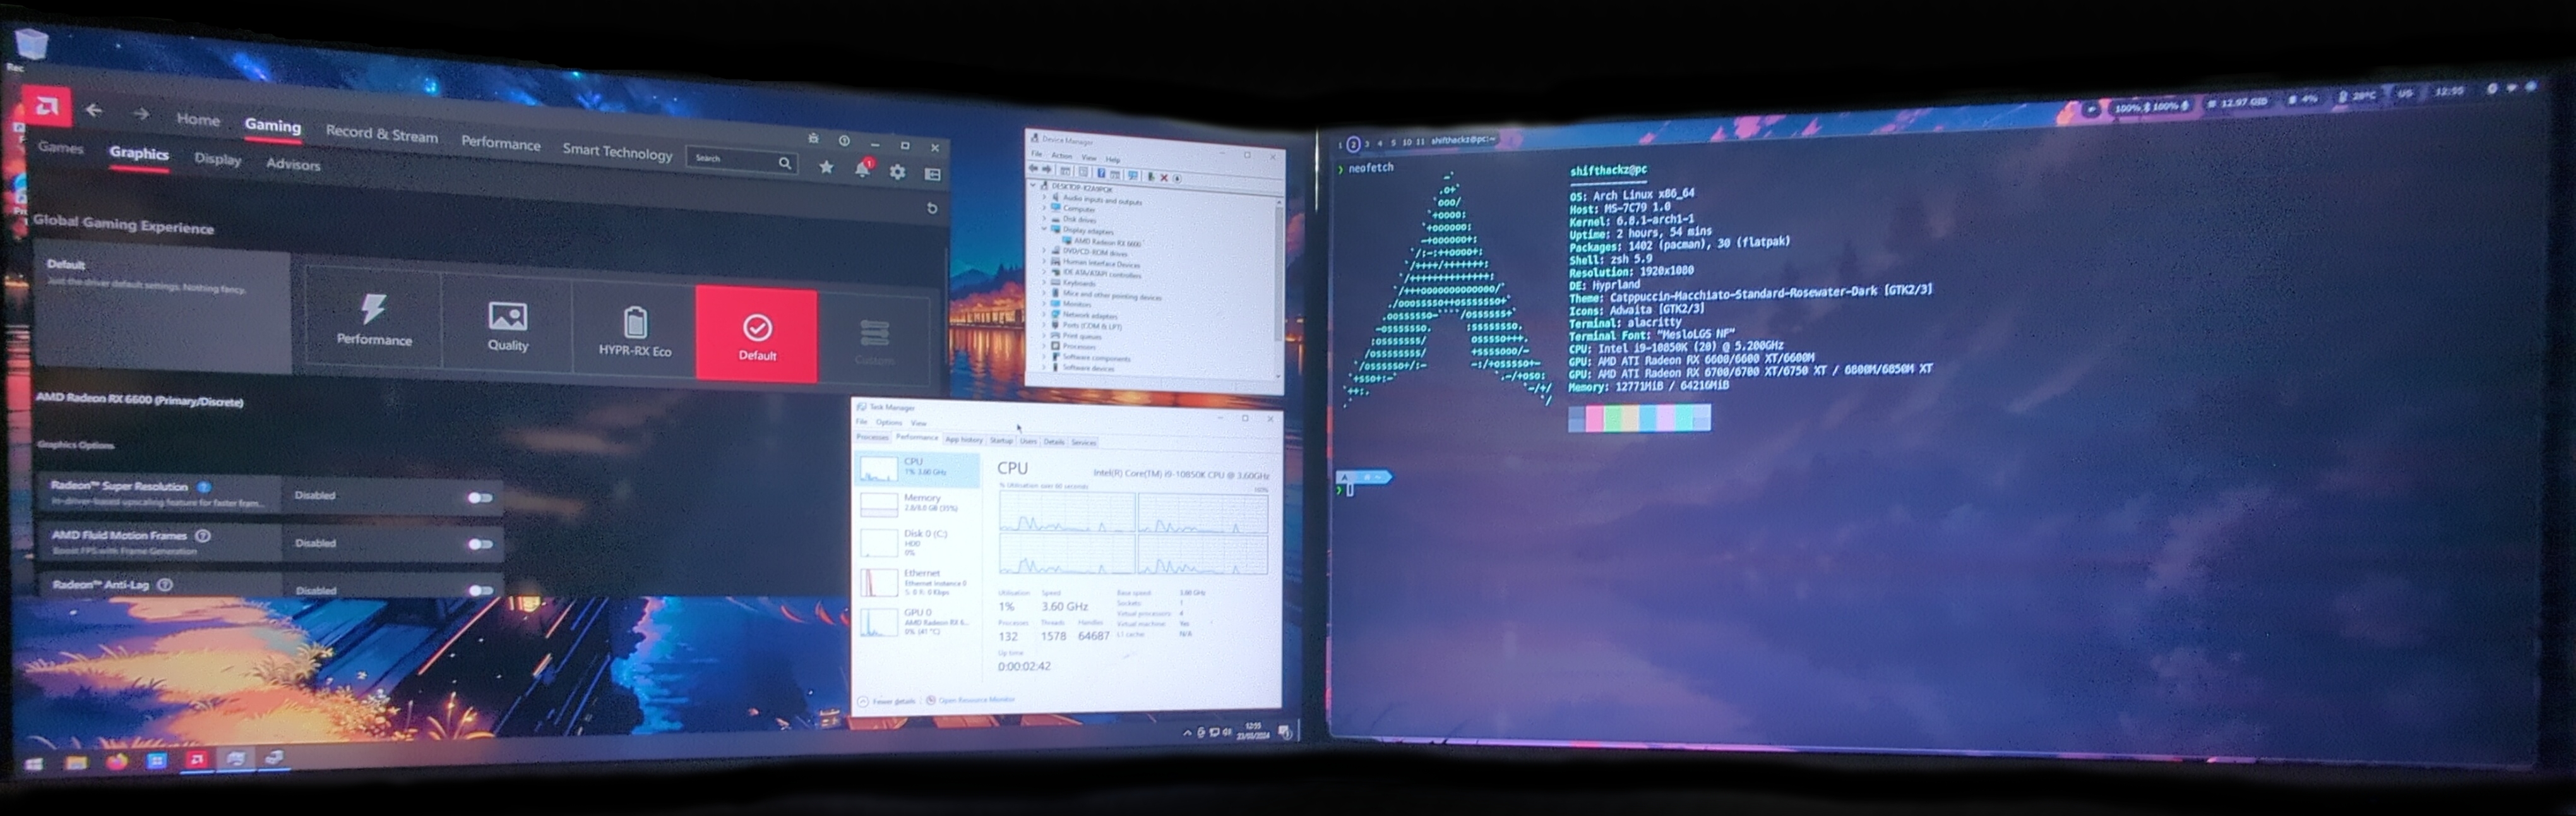 Final GPU Passthrough result: Windows VM on the left, Linux host on the right